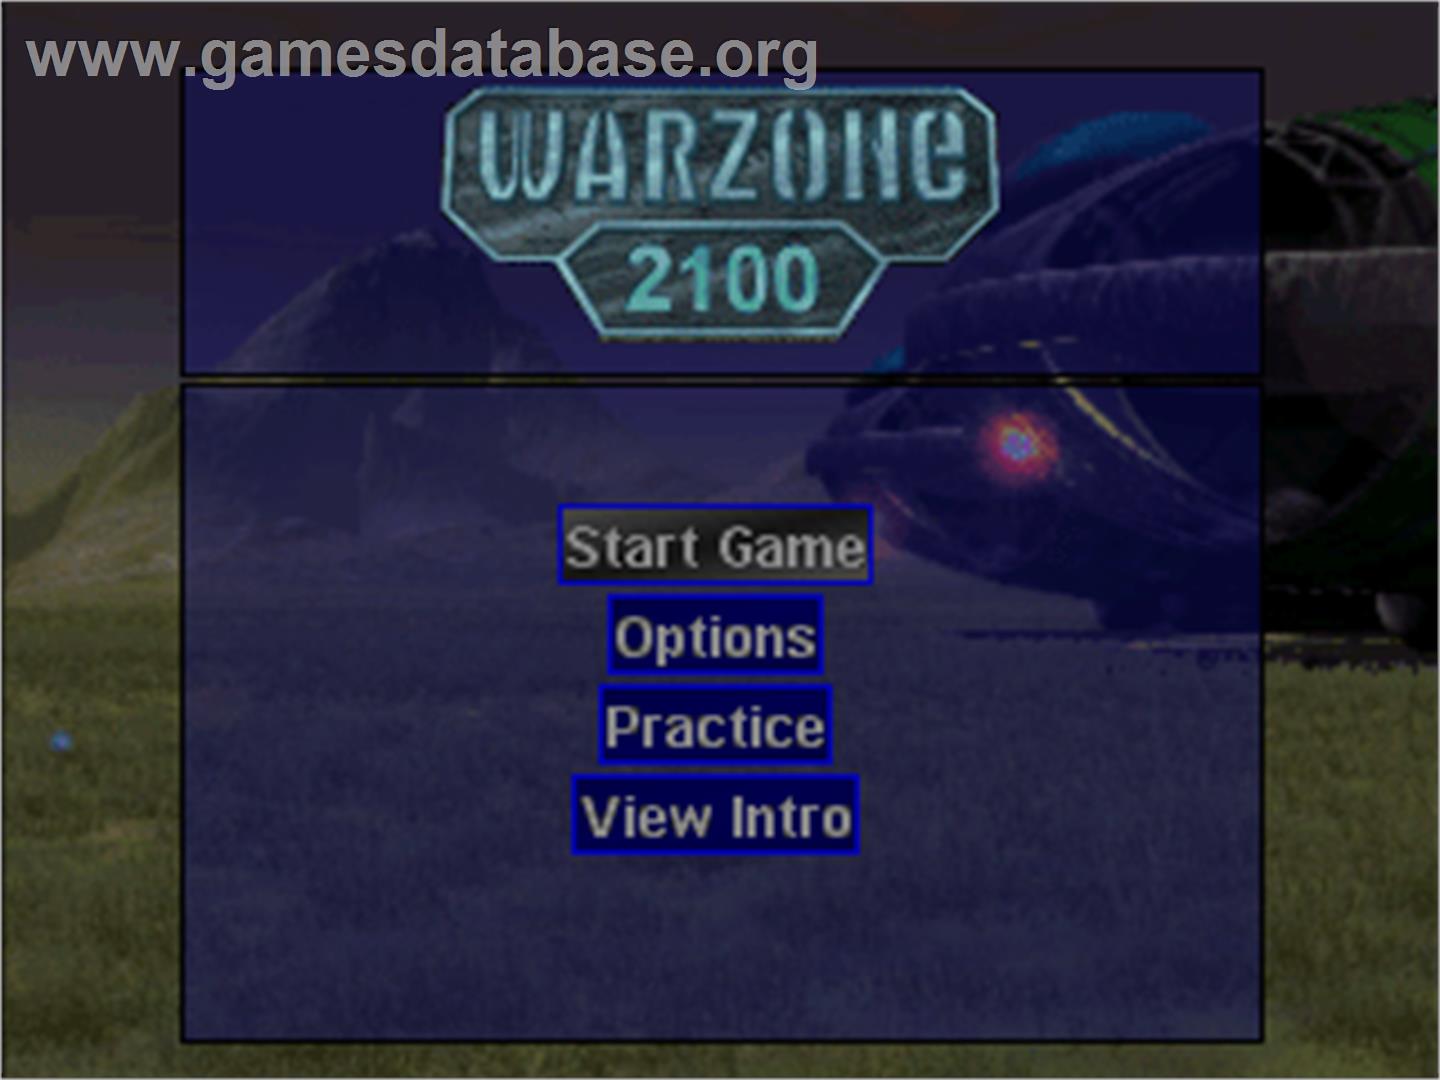 Warzone 2100 - Sony Playstation - Artwork - Title Screen